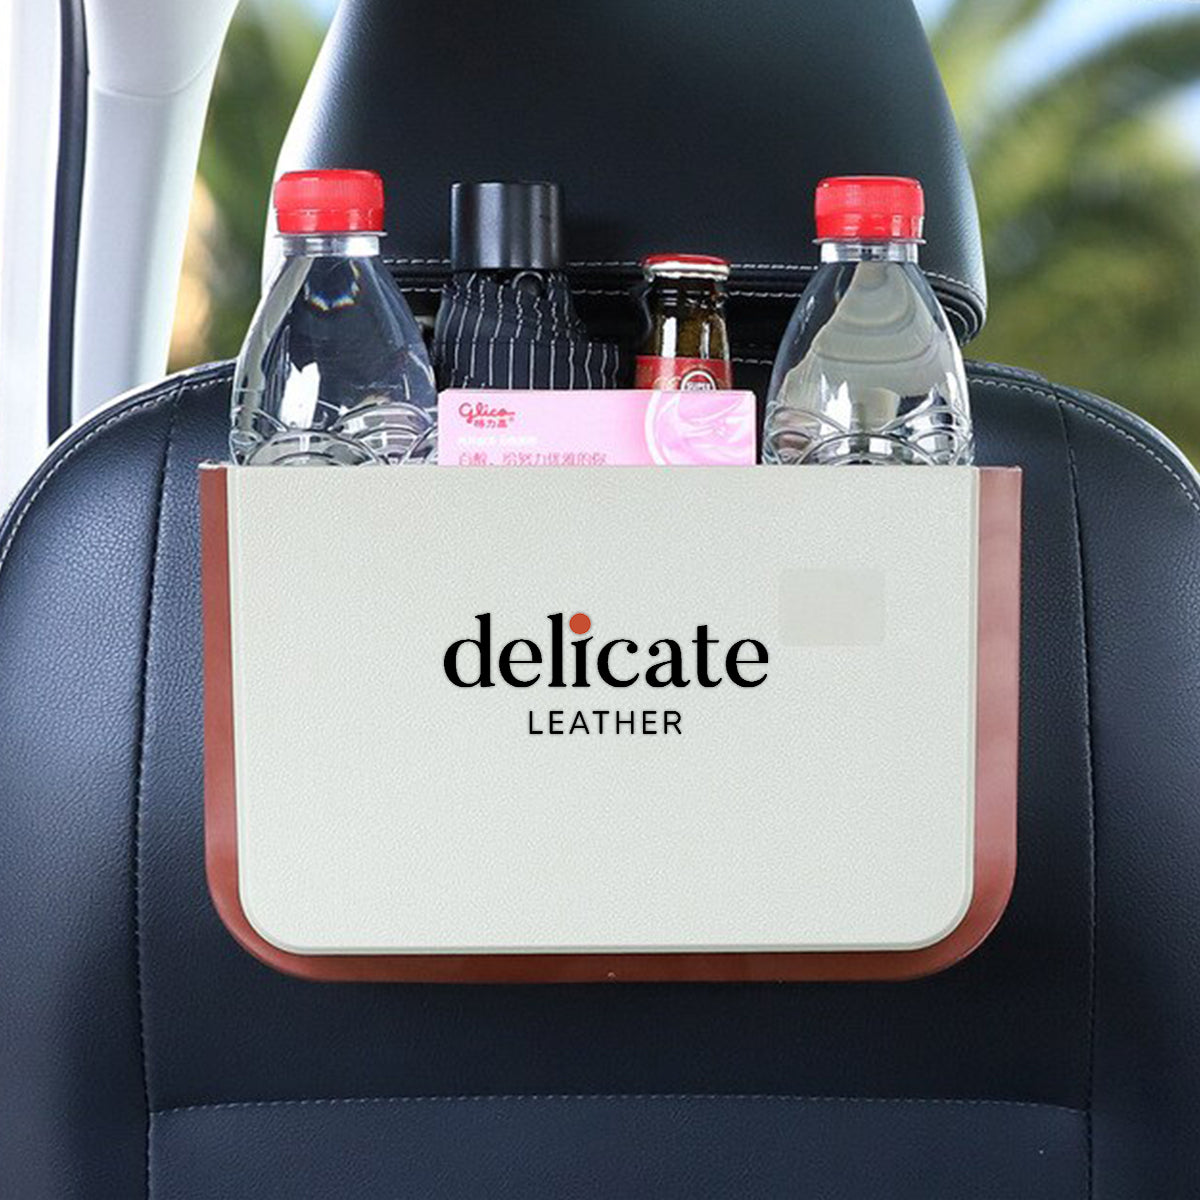 Delicate Leather Hanging Waterproof Car Trash can-Foldable, Custom For Your Cars, Waterproof, and Equipped with Cup Holders and Trays. Multi-Purpose, Car Accessories TY11992 - Delicate Leather